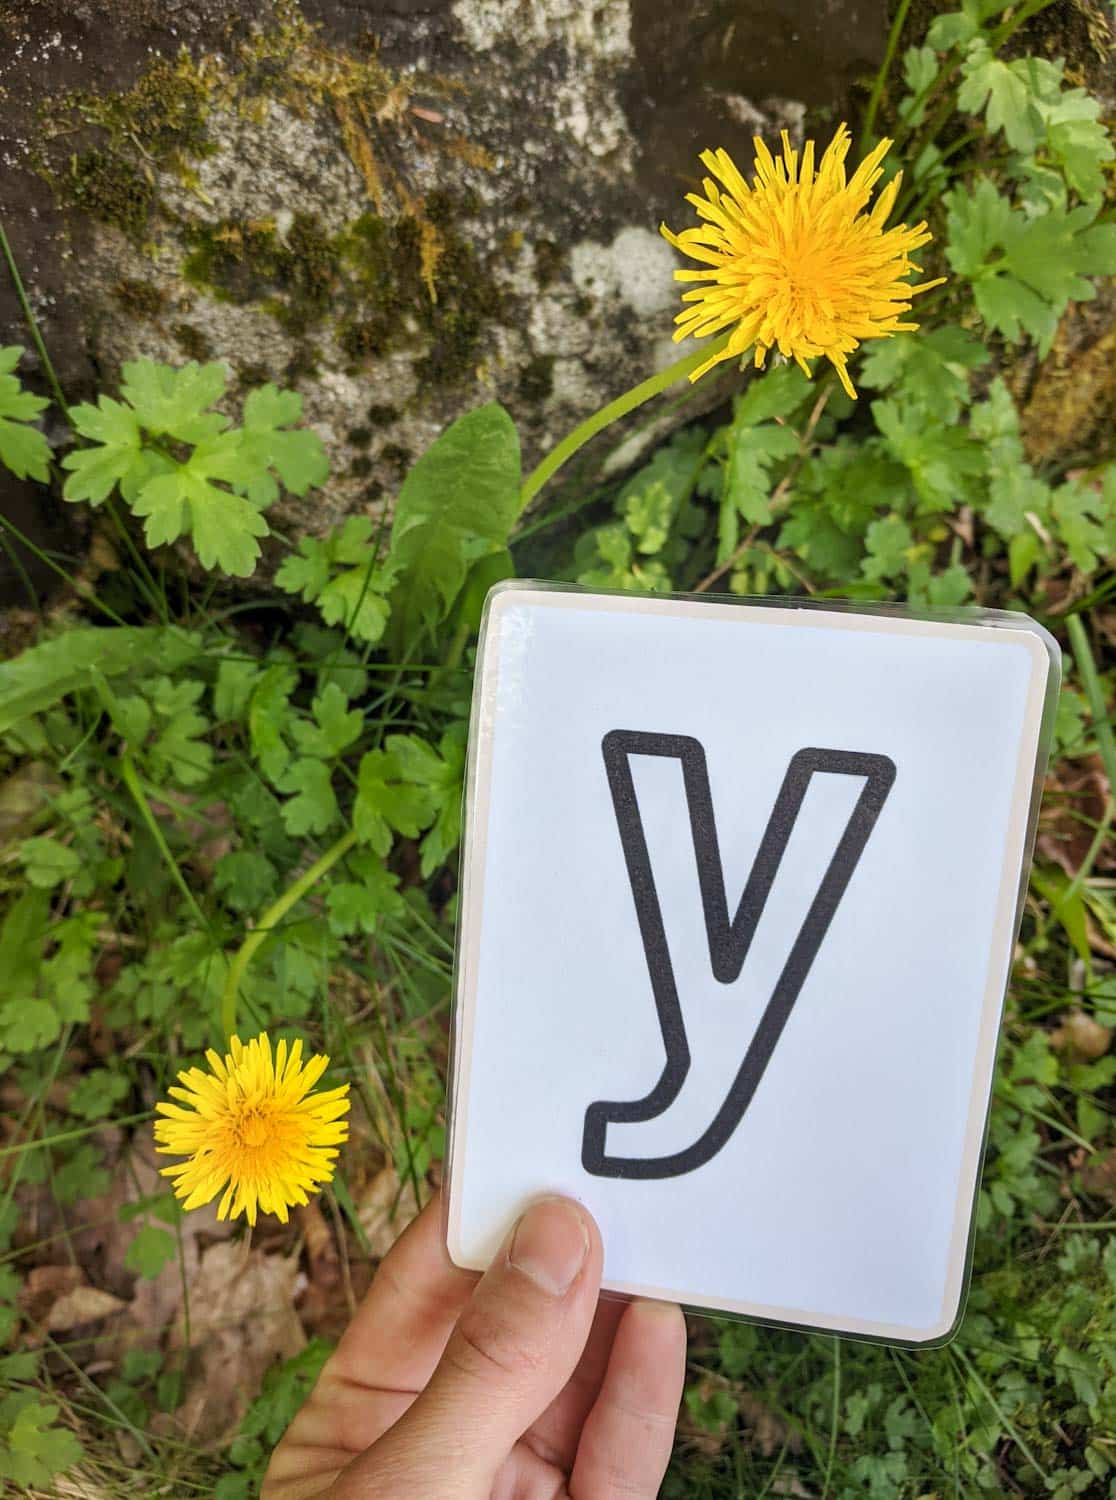 hand holding a letter y flashcard outside next to yellow dandelions growing in grass and rocks